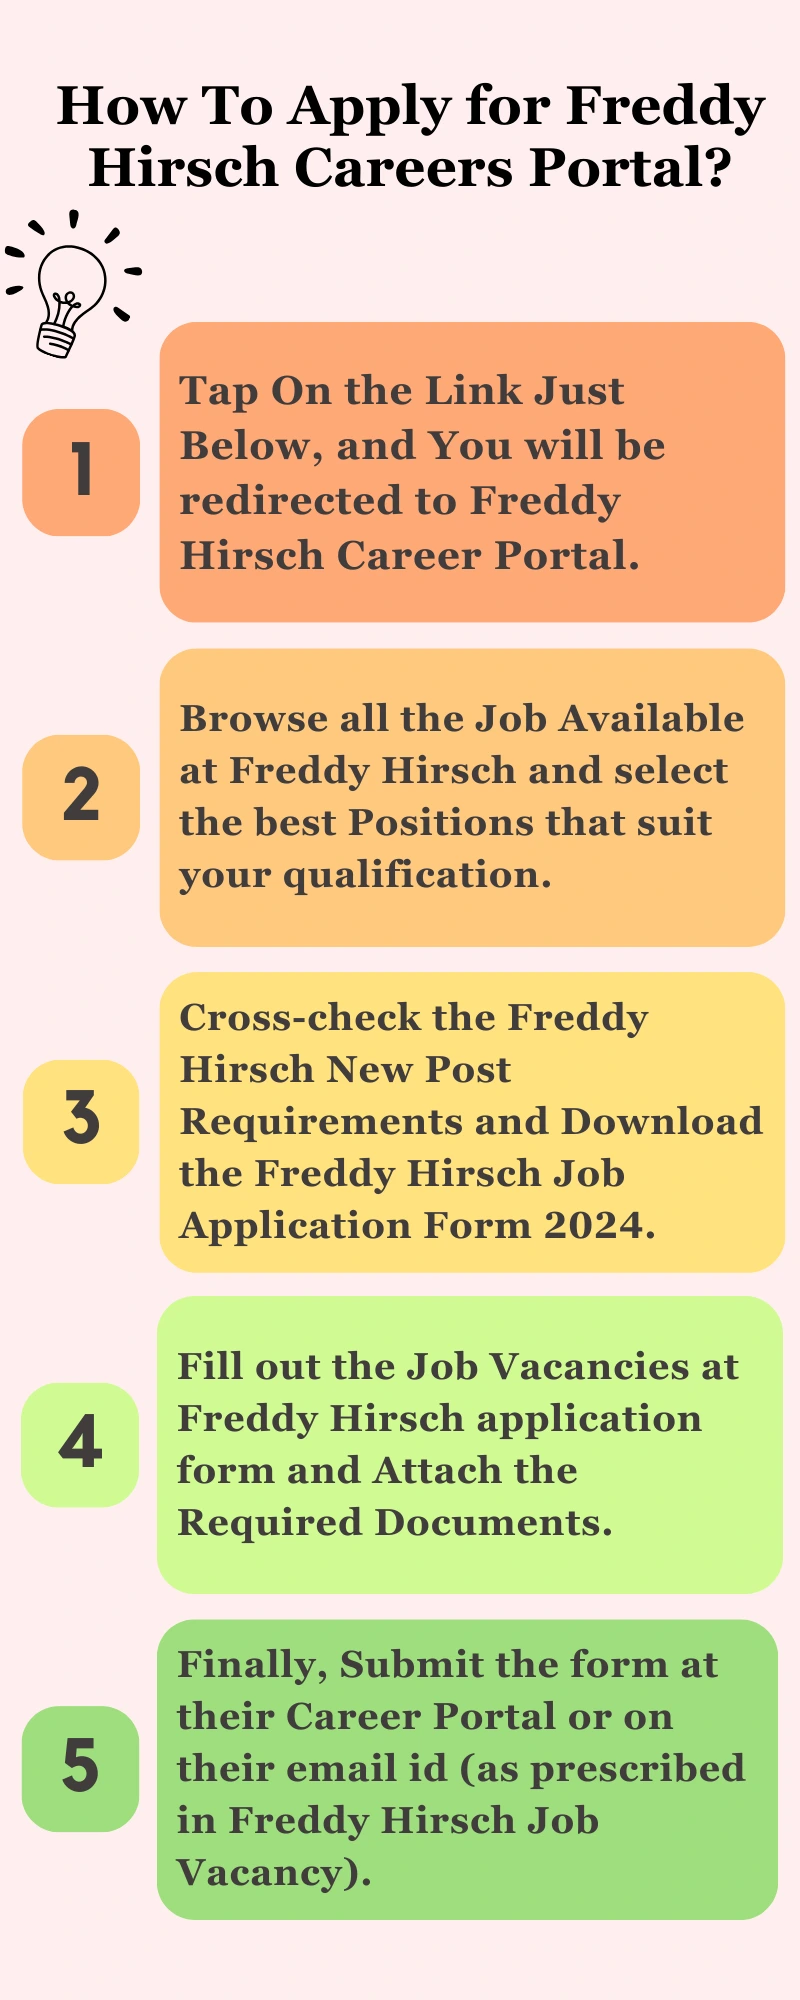 How To Apply for Freddy Hirsch Careers Portal?